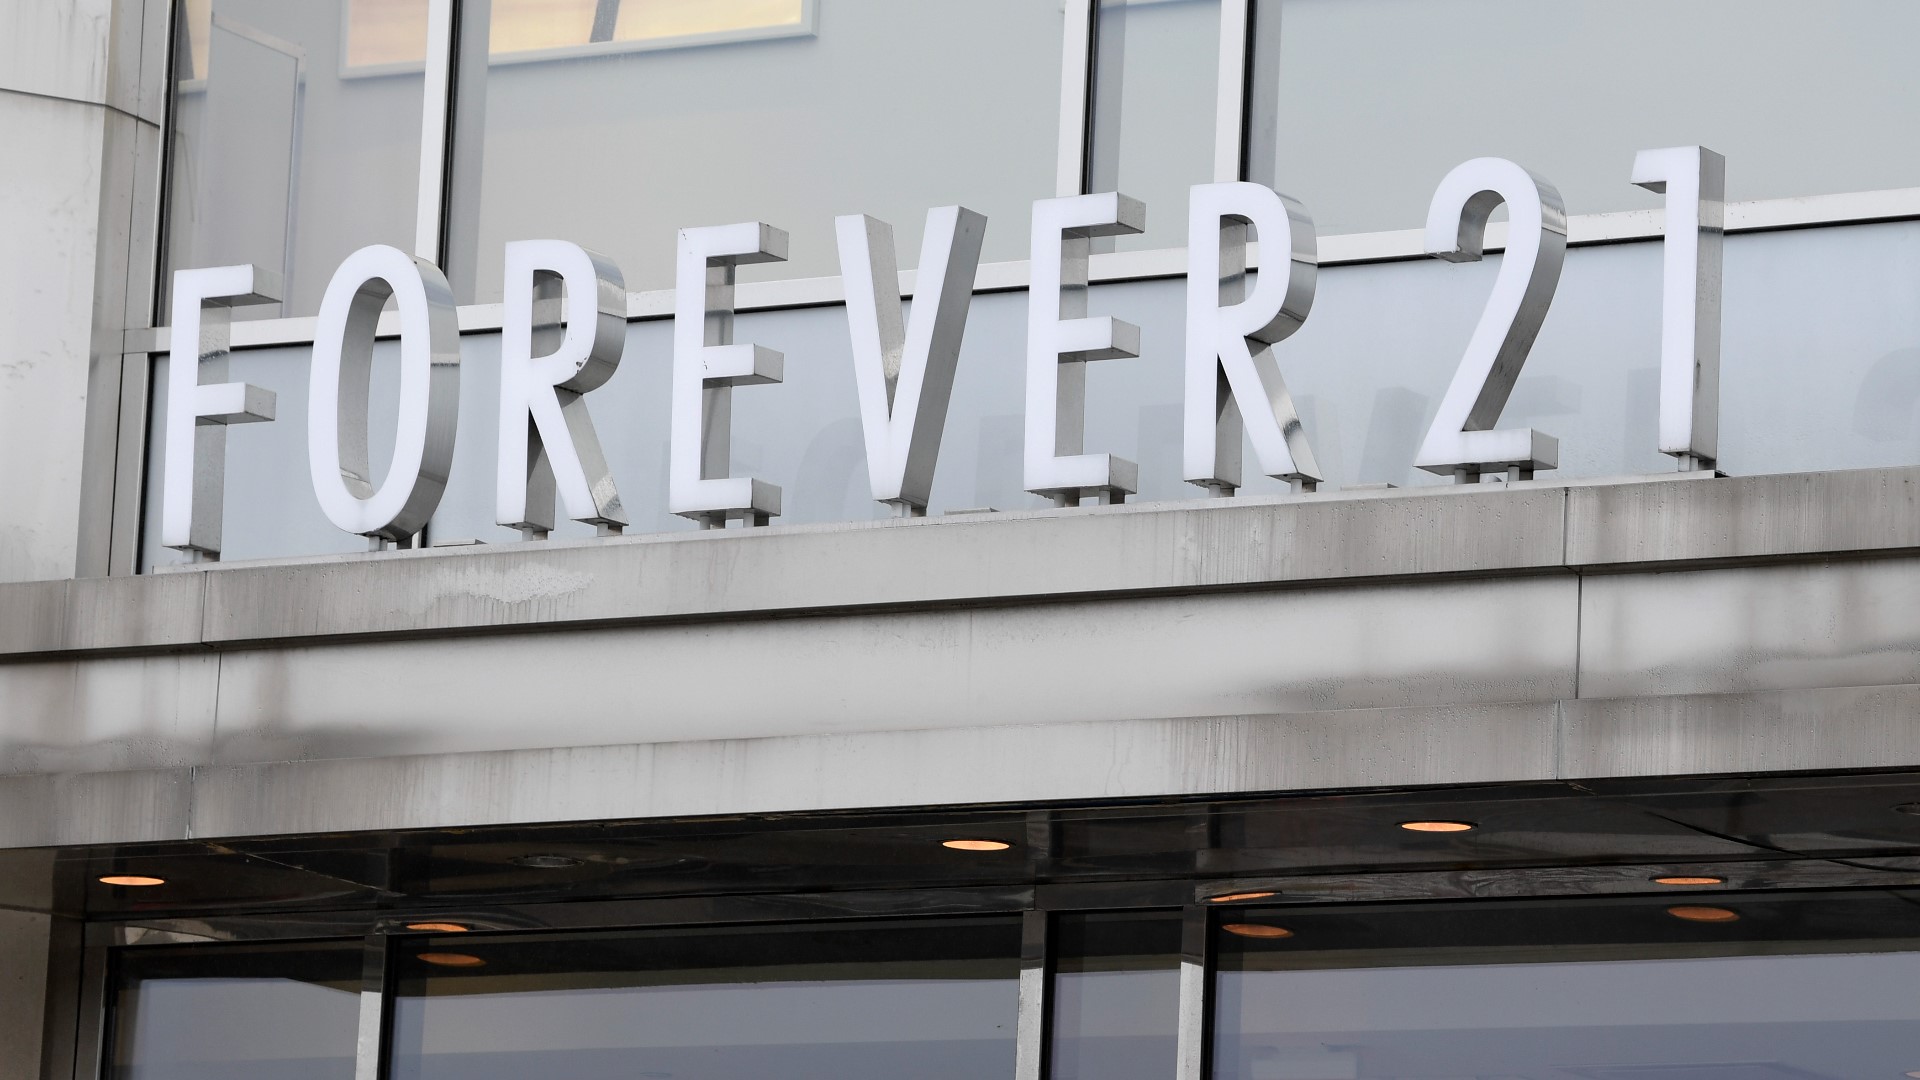 Virginia man arrested for filming in Forever 21 dressing room | wusa9.com